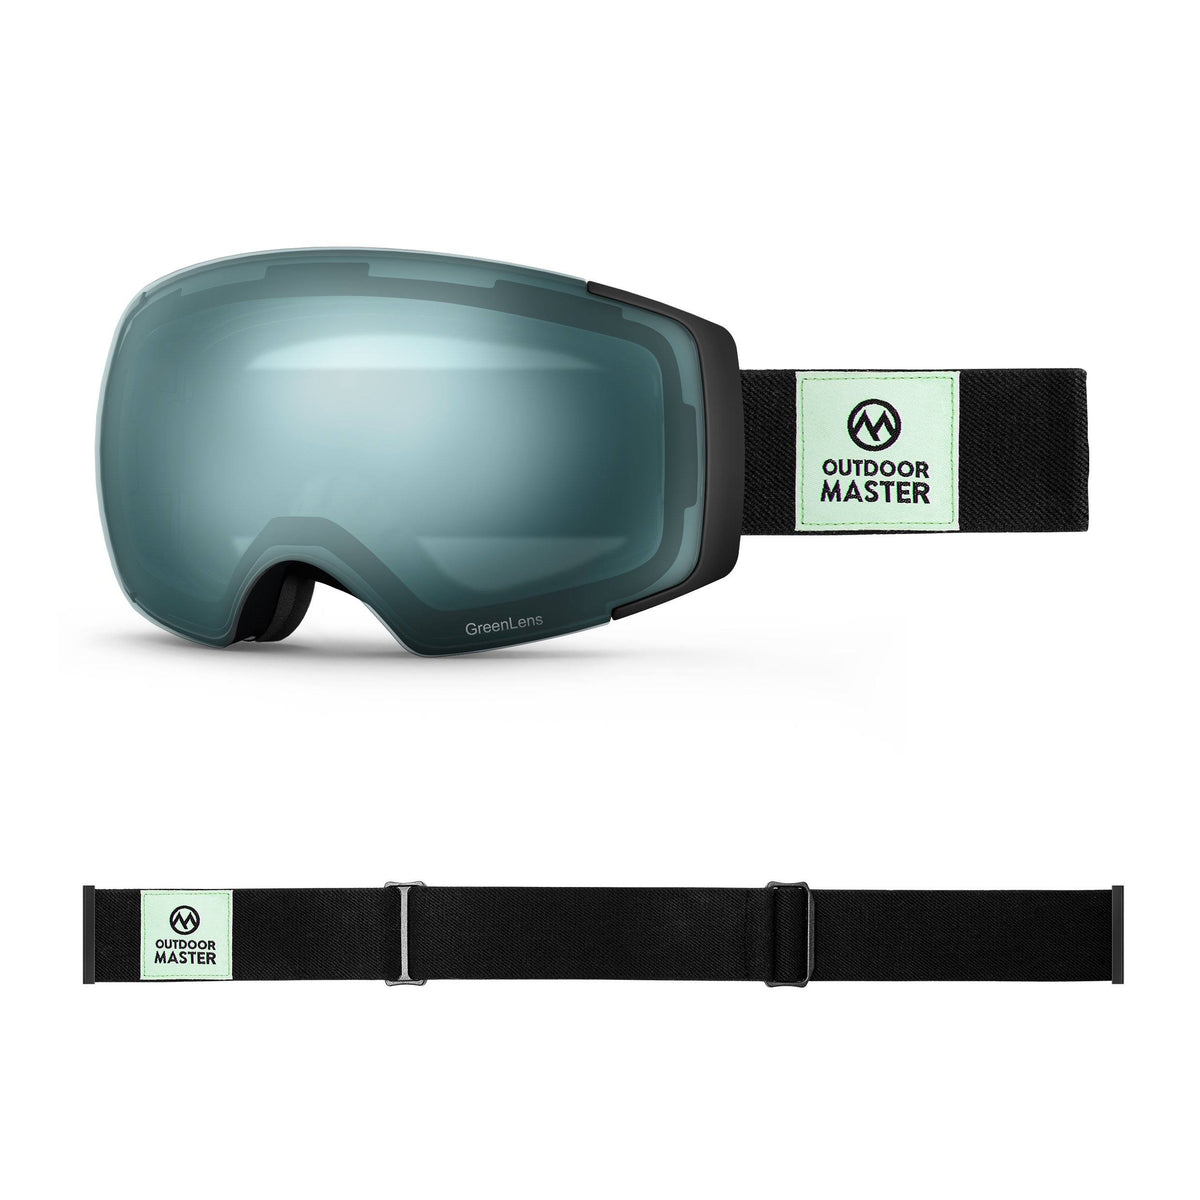 Eco-friendly Ski Goggles Pro Series - The Disappearing Places/Classic BambooStraps Limited Edition OutdoorMaster GreenLens VLT 20% TAC Green Polarized Classic BambooStraps